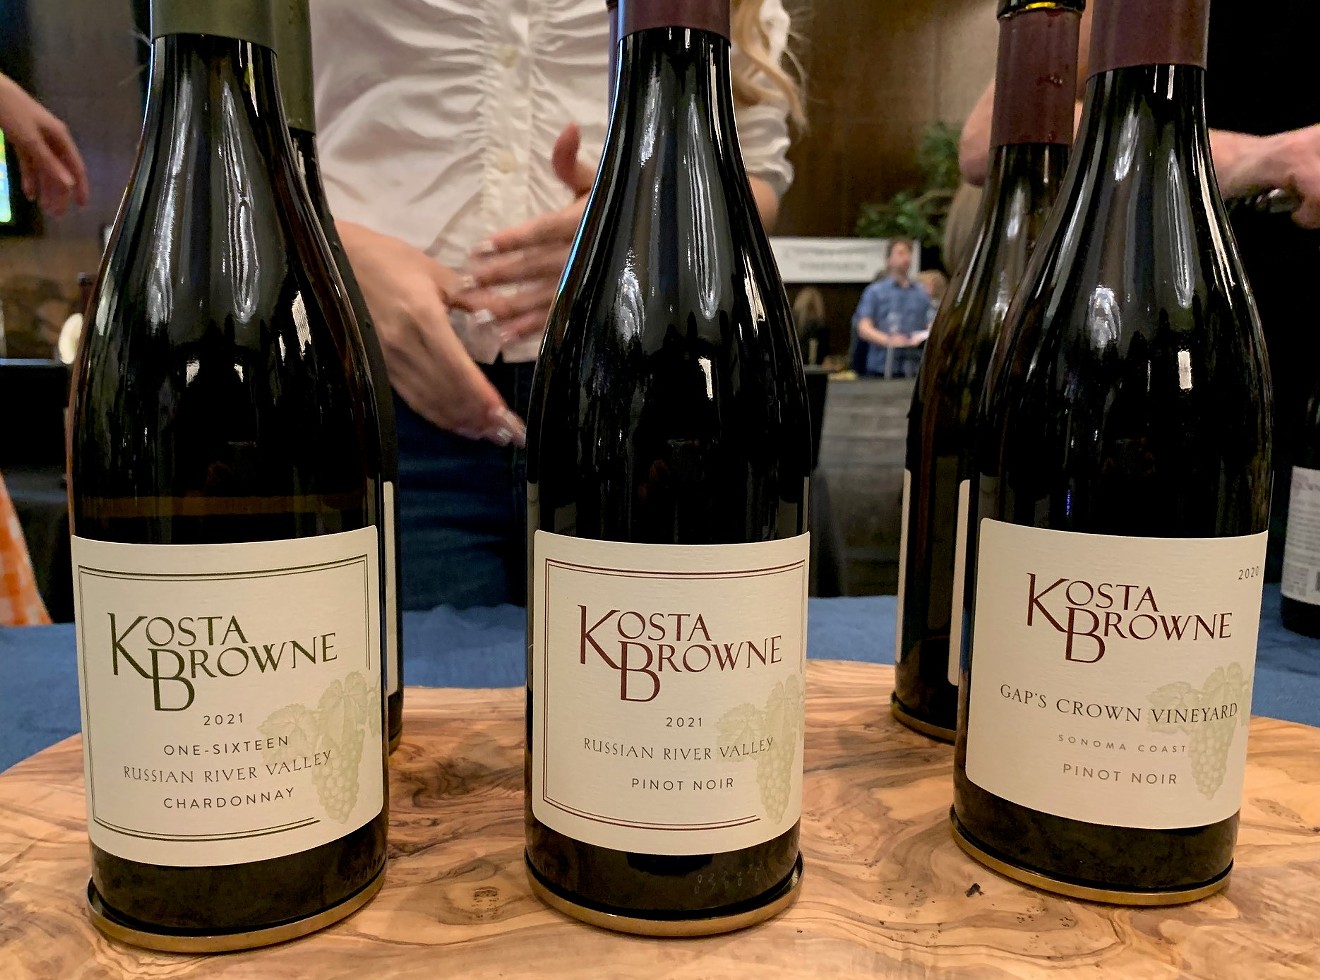 Kosta Browne was on the forefront of introducing luxury pinot noirs.